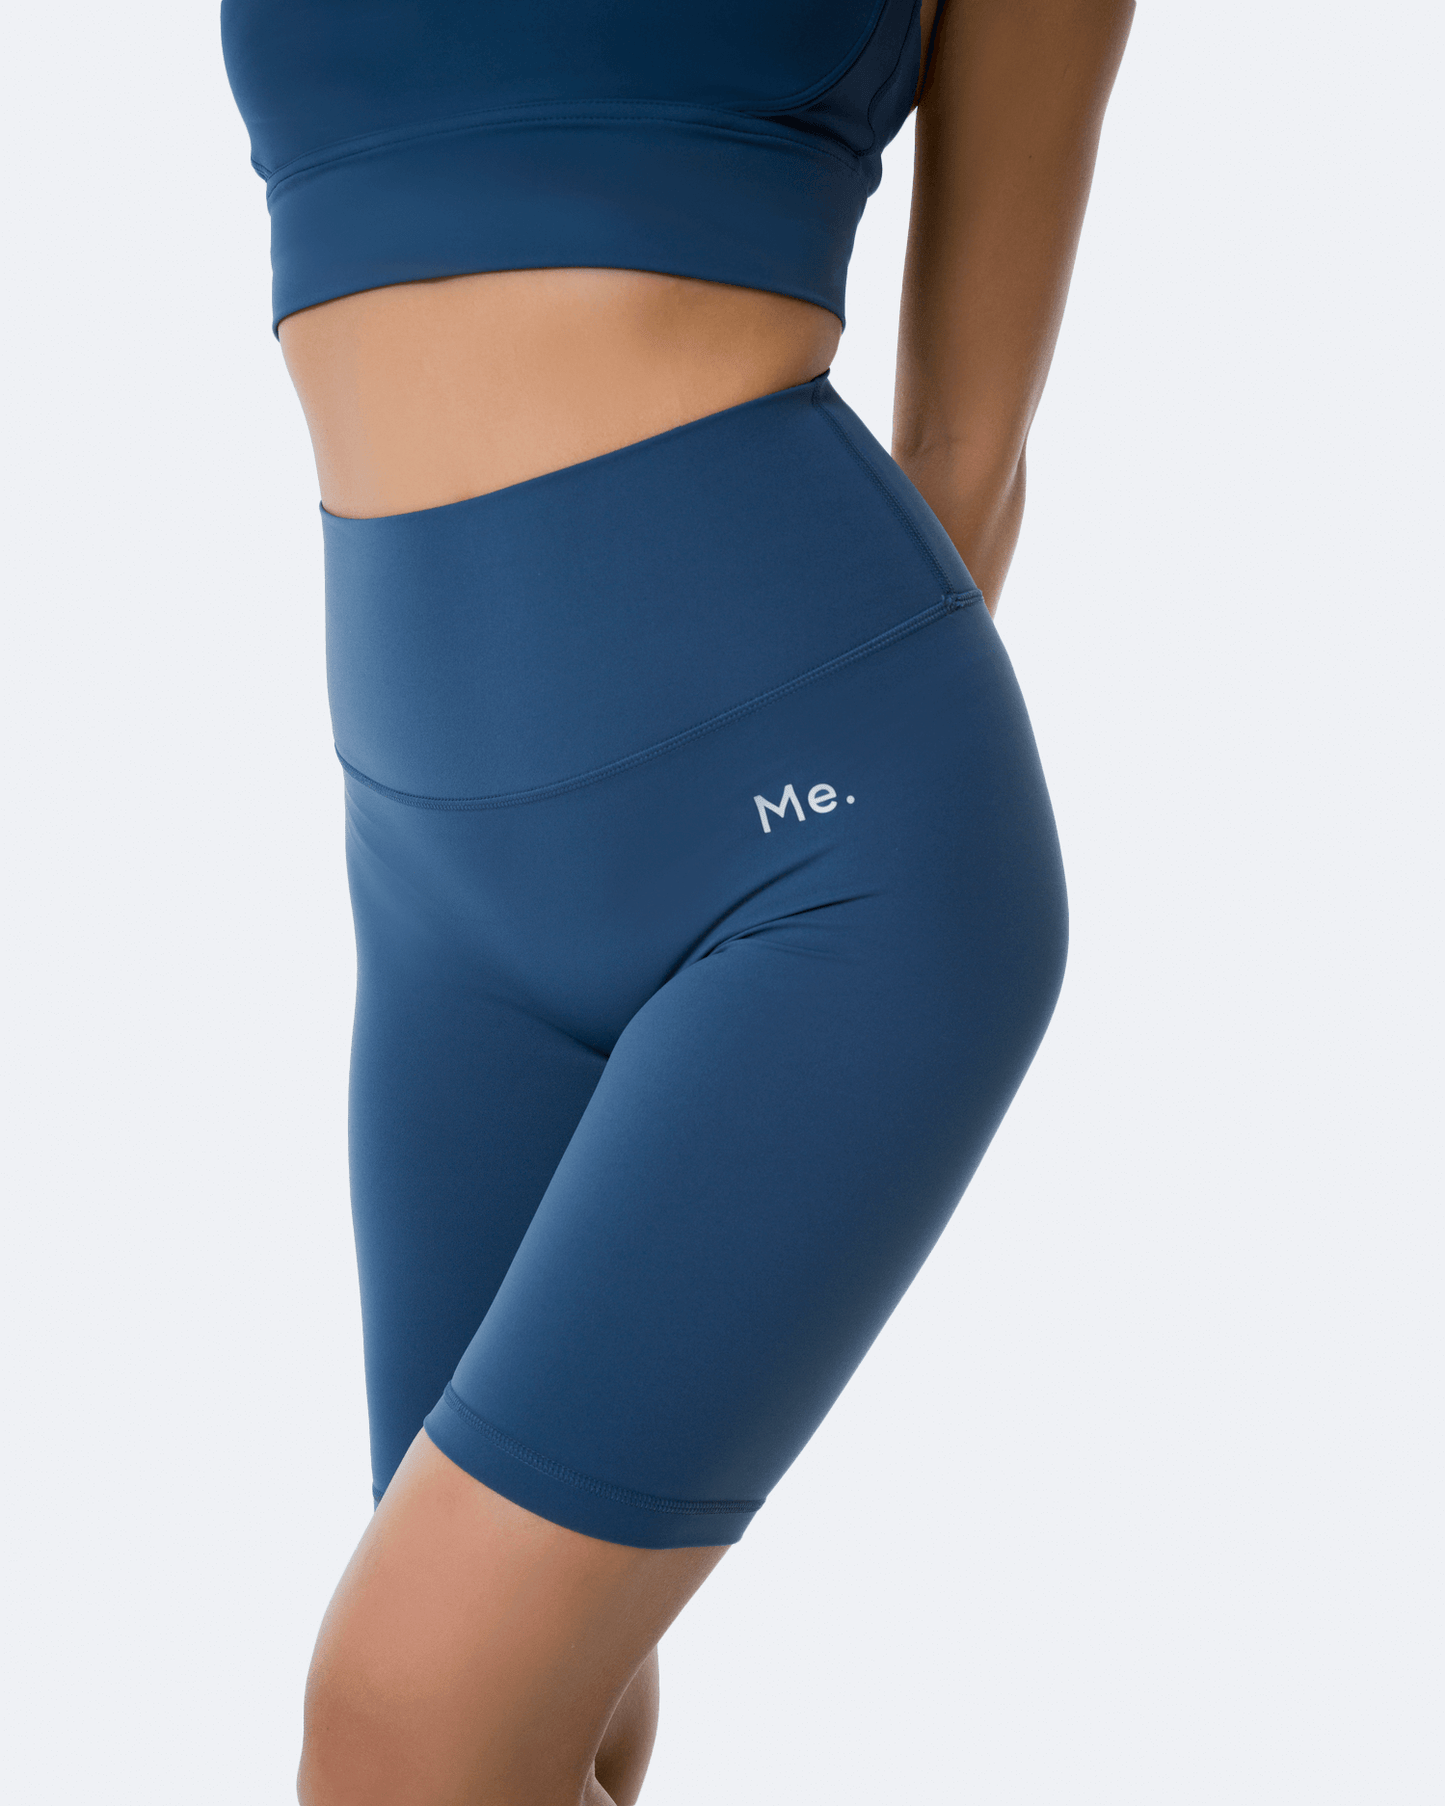 Iris Blue Strappy Back Top and Bike Shorts Sports Set